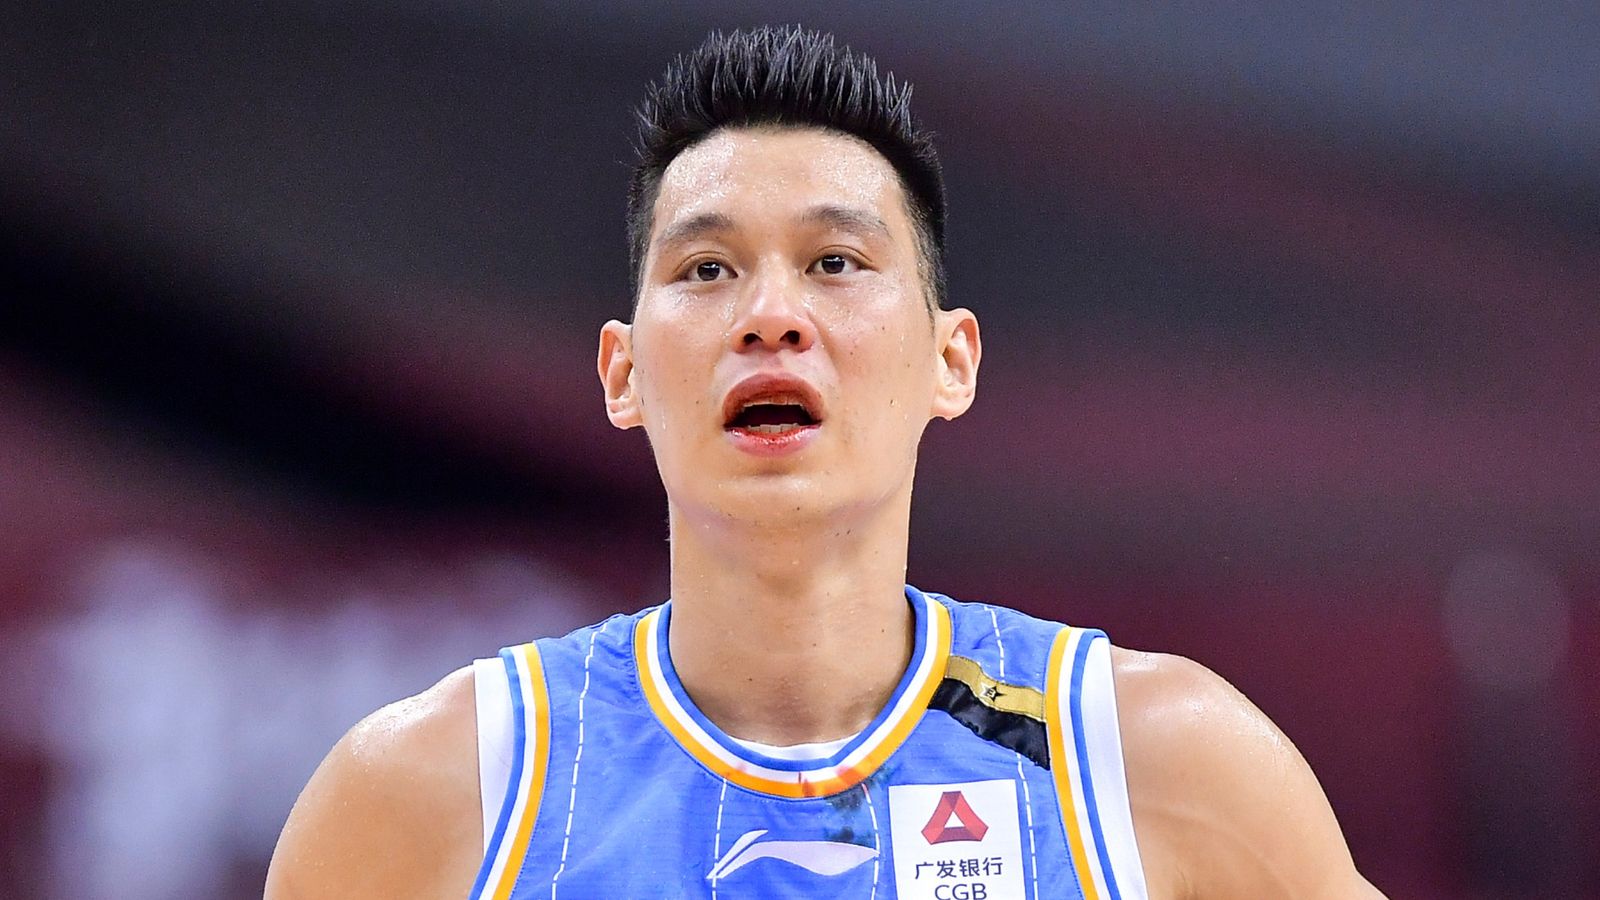 The Jeremy Lin Debate No One Wants to Have